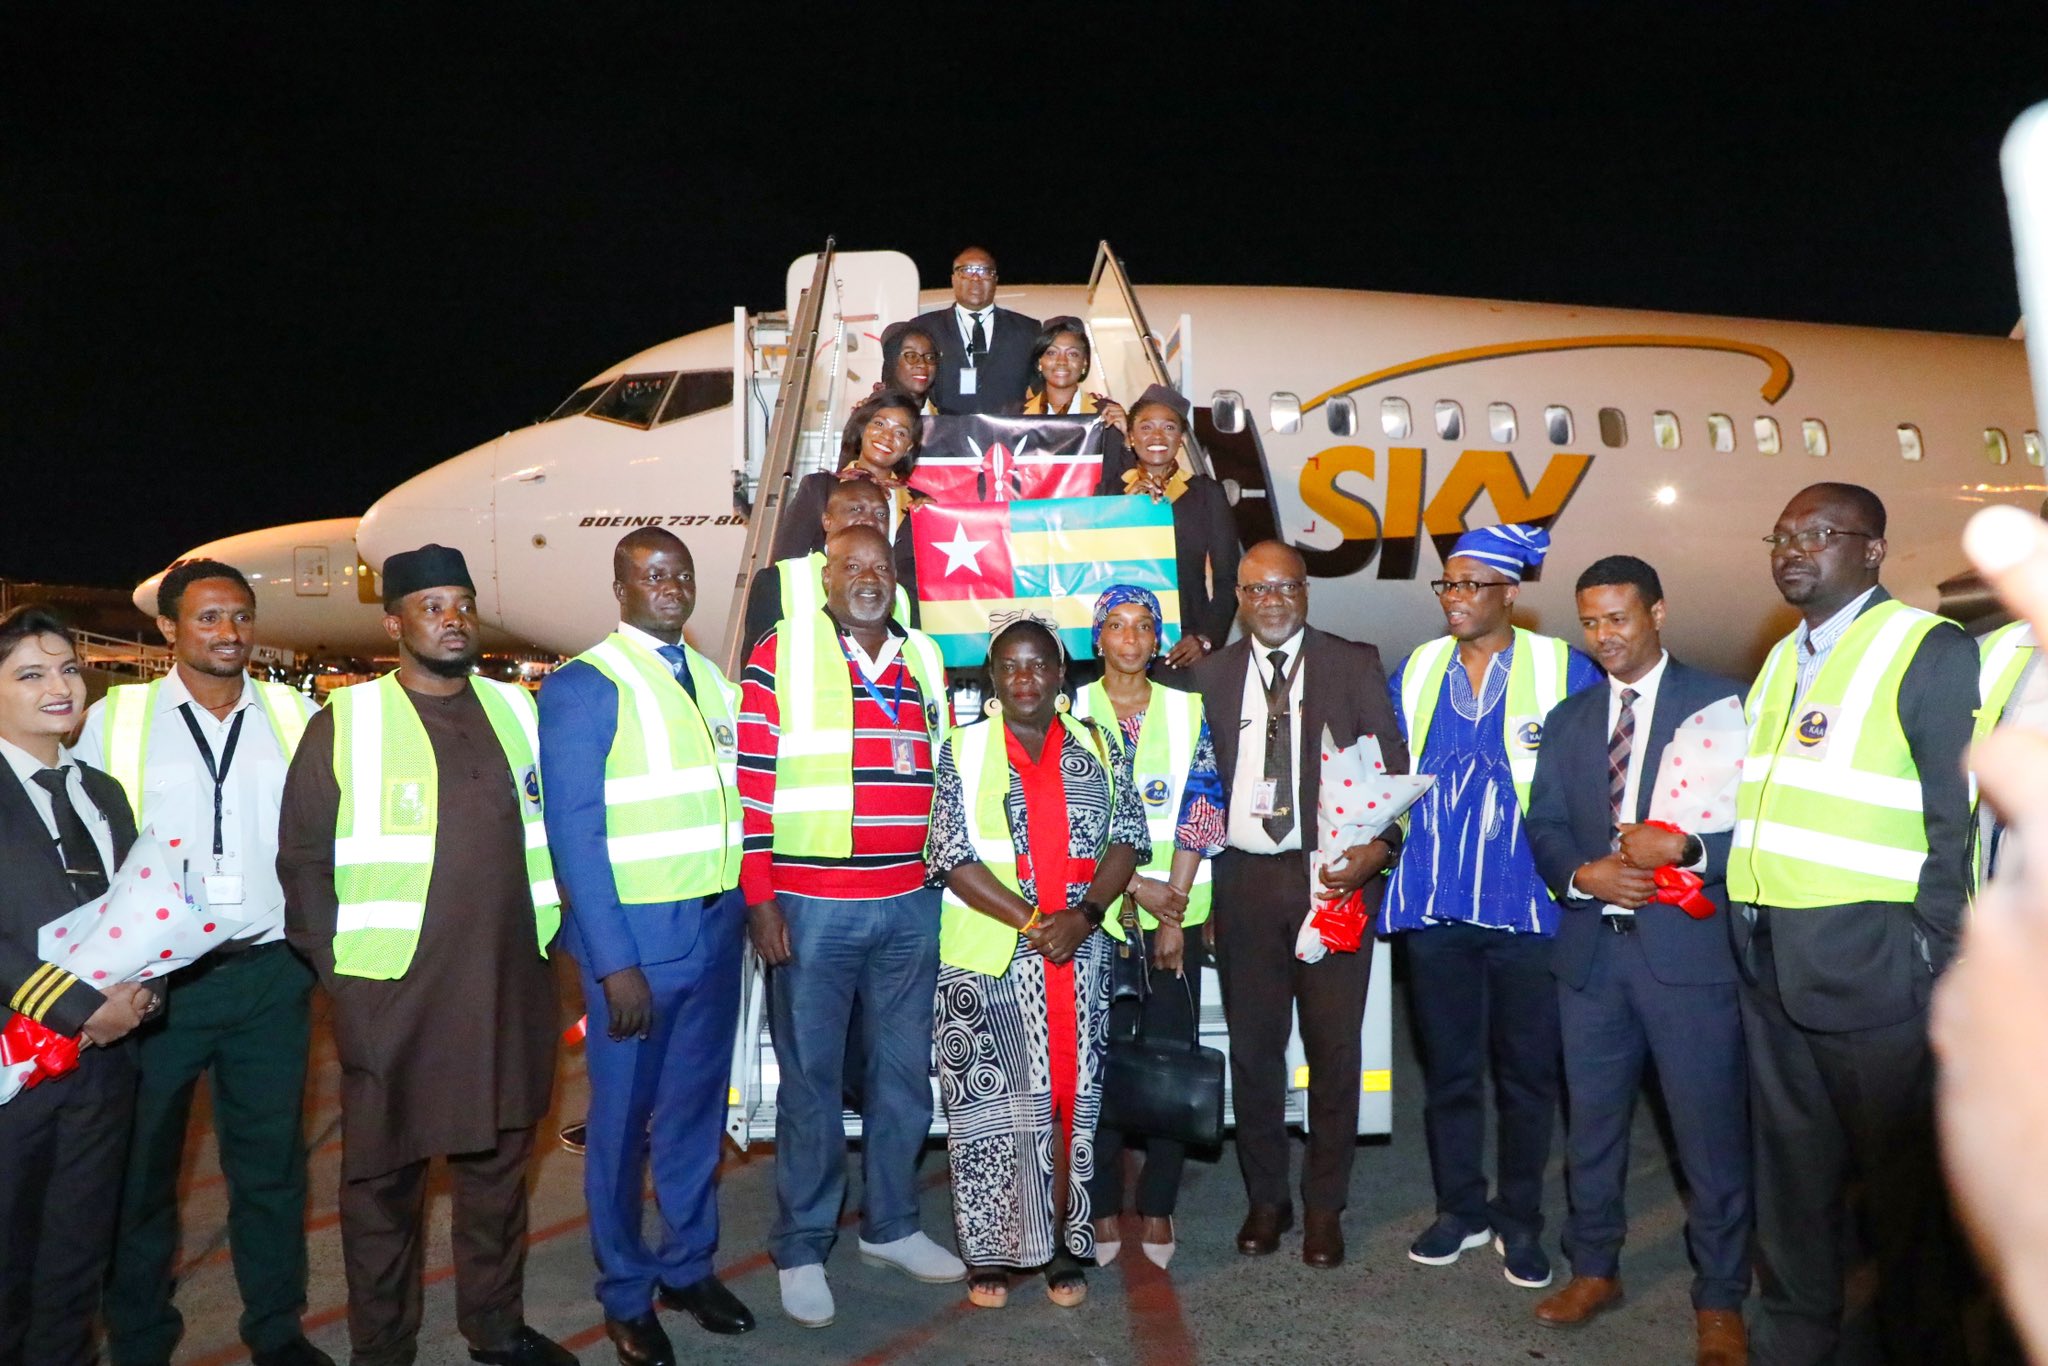 Jubilation as JKIA Welcomes Another Airline